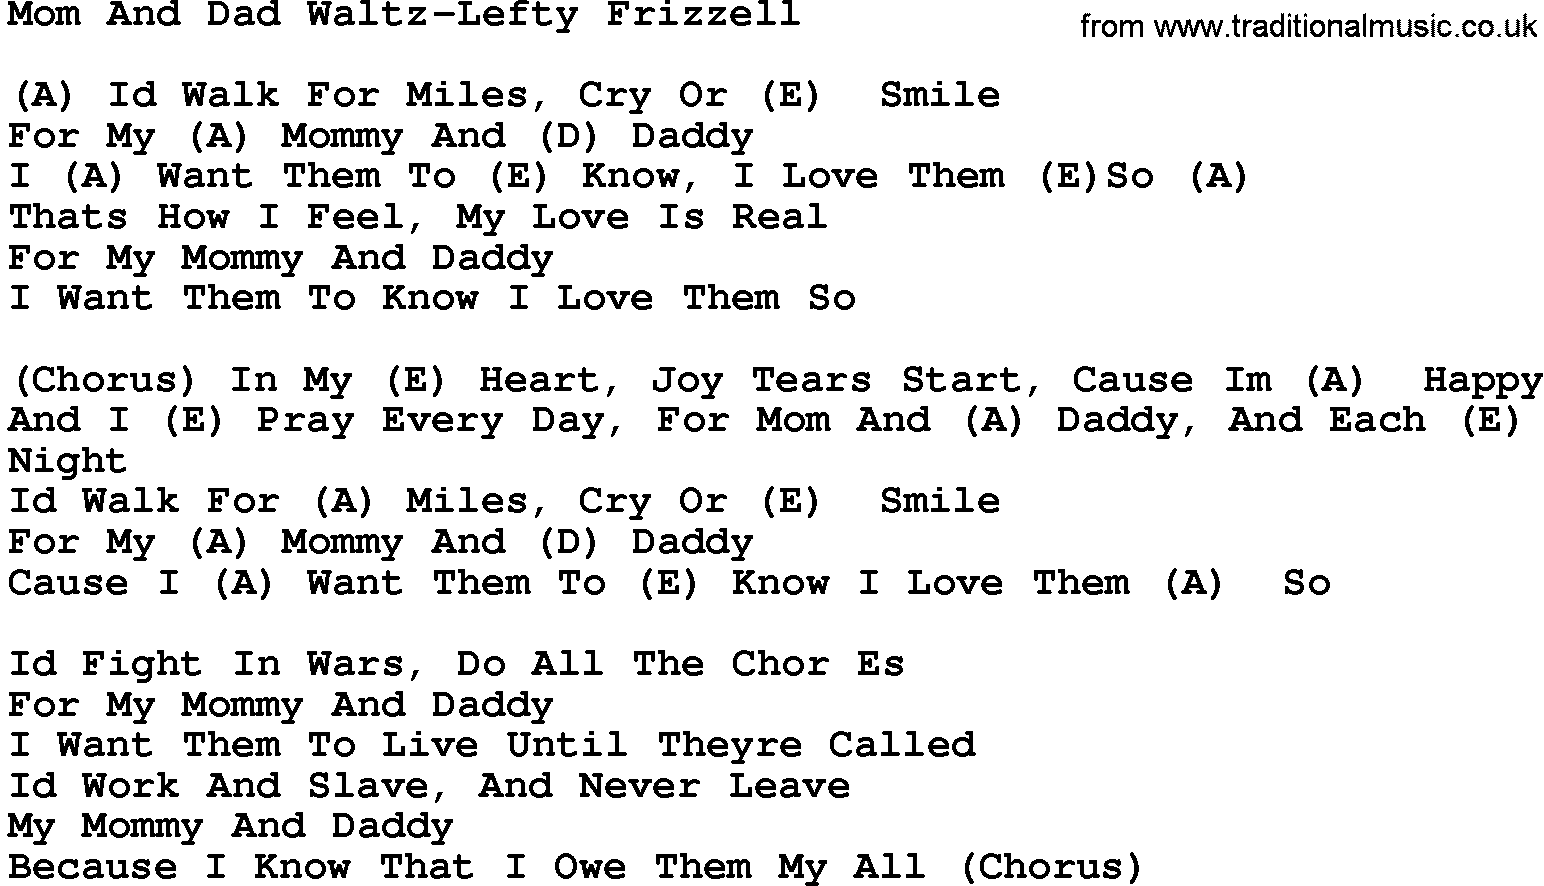 Country music song: Mom And Dad Waltz Lefty Frizzel lyrics and chords